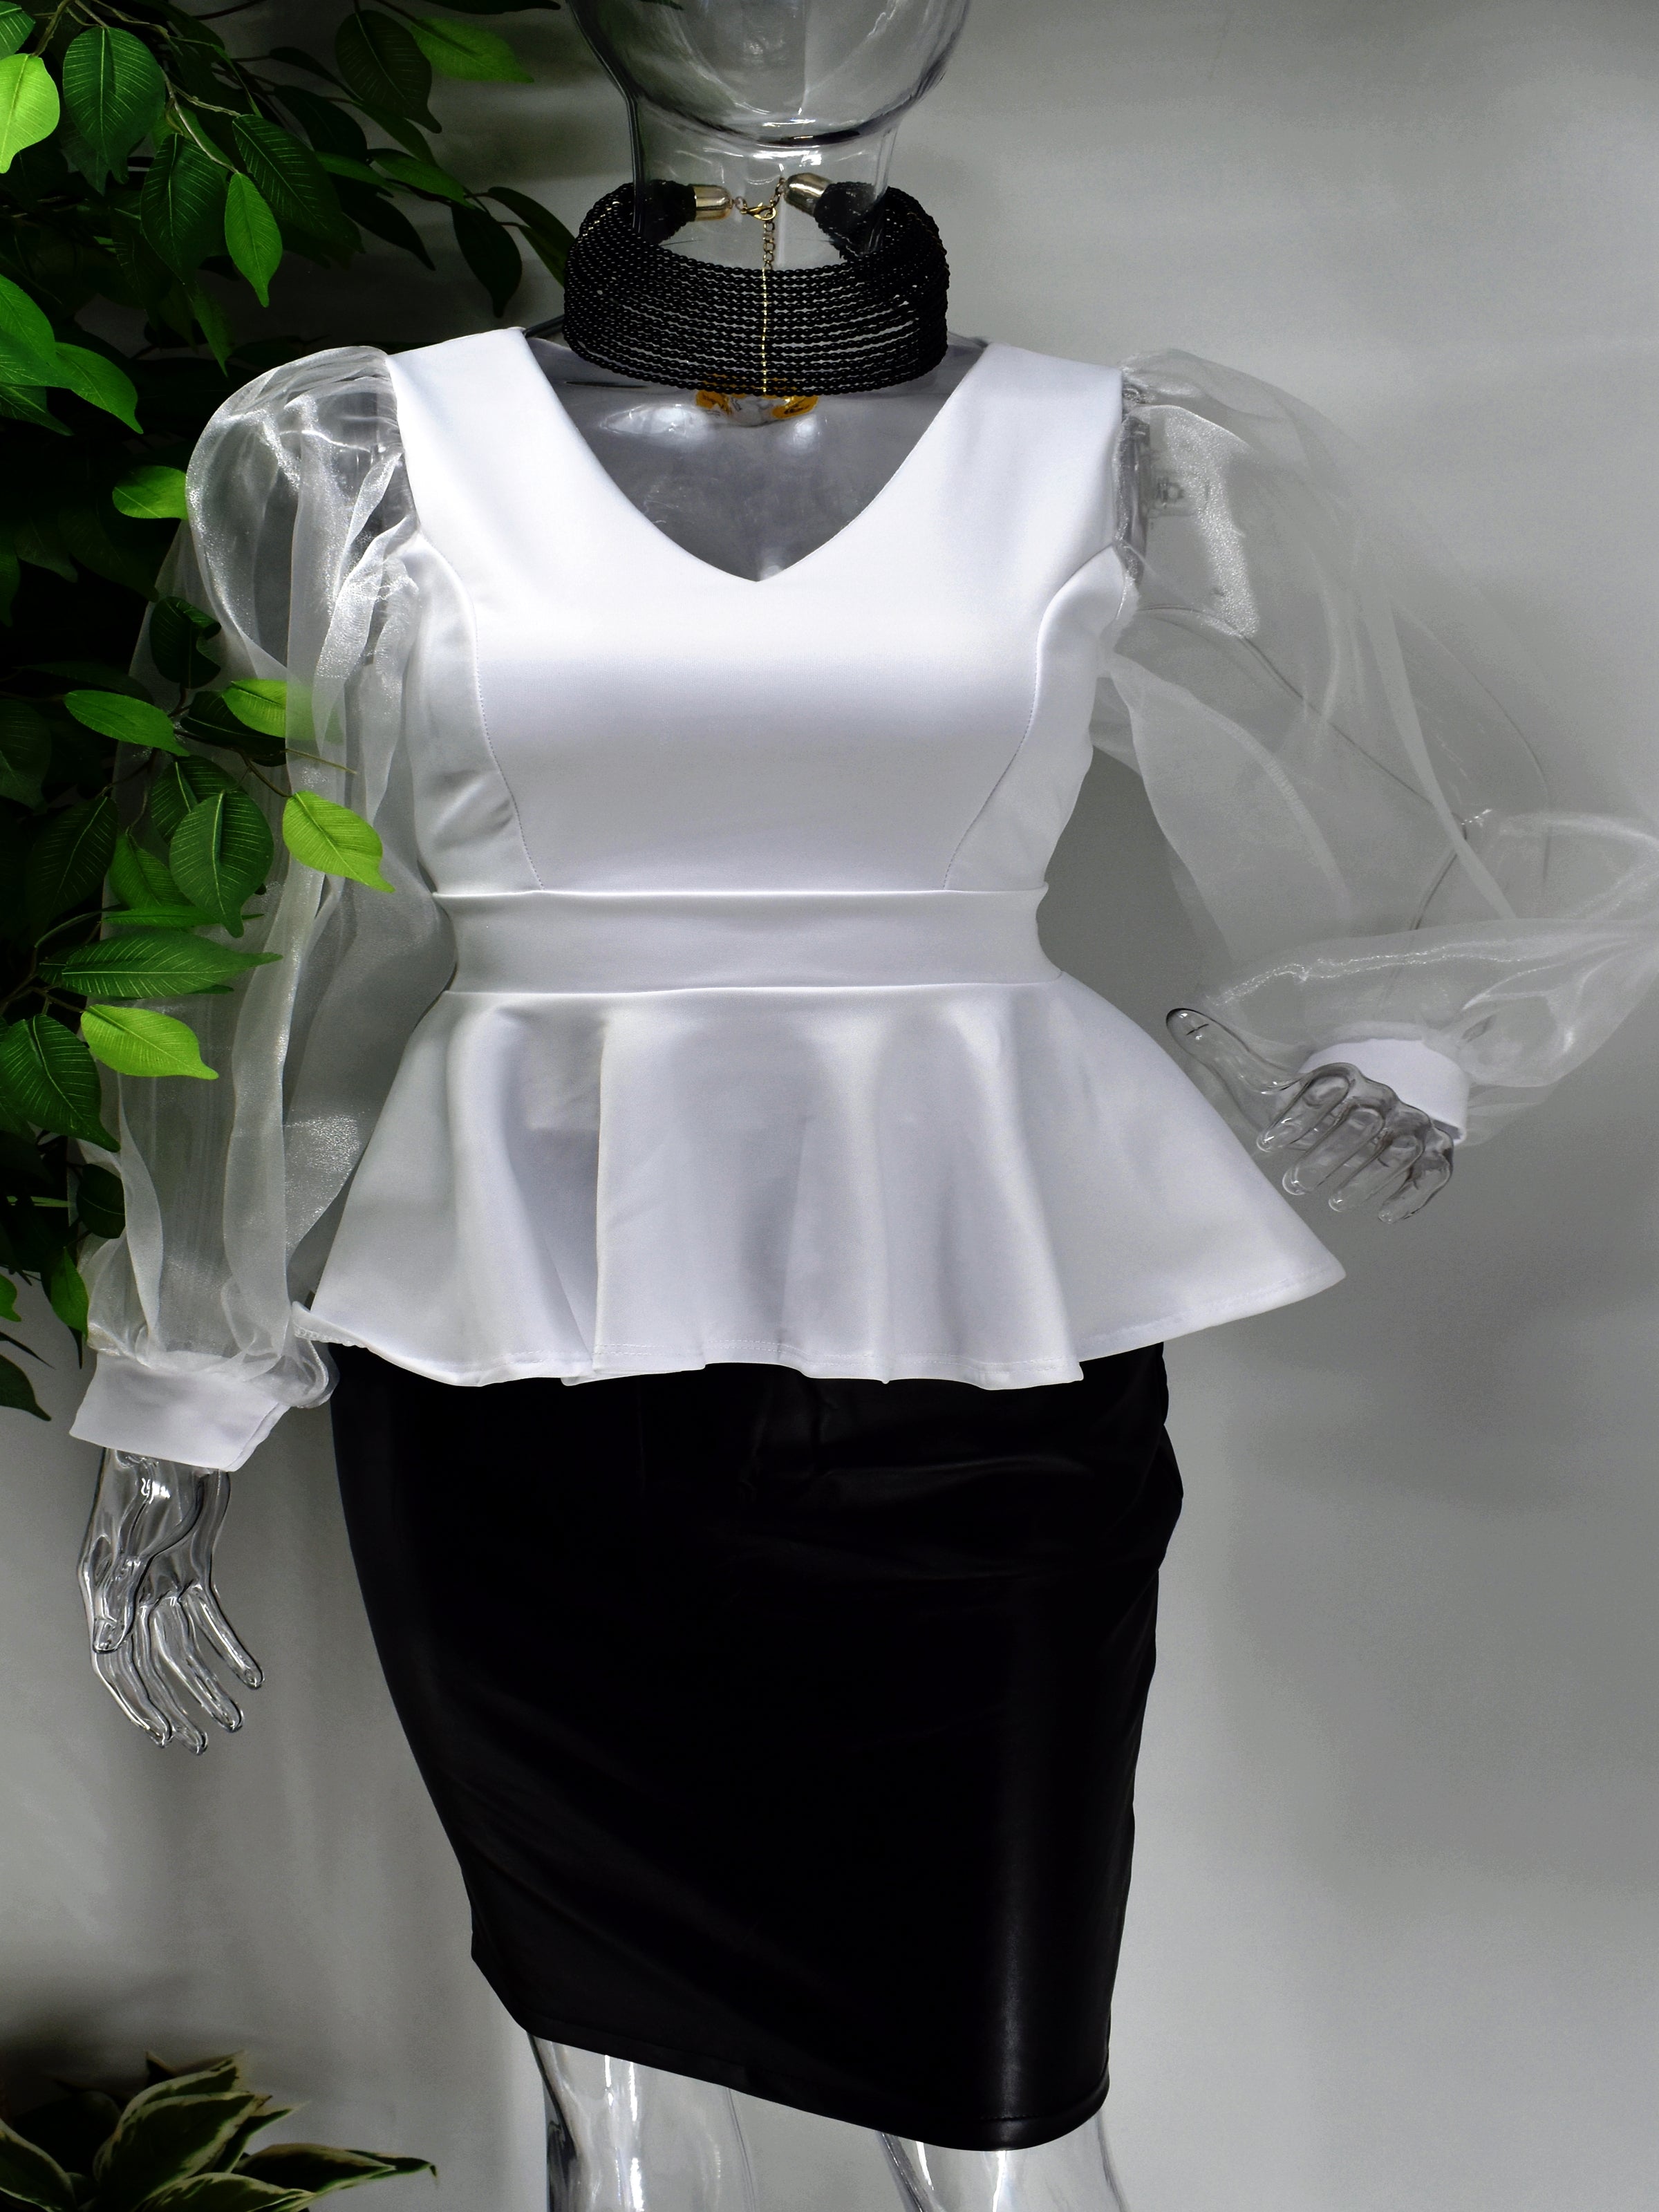 All eyes will be on you in our Bettine white peplum top. Our Bettine has a v- neckline with a beautiful peplum design. Classic and chic it is complimented by a sheer balloon sleeve design. 